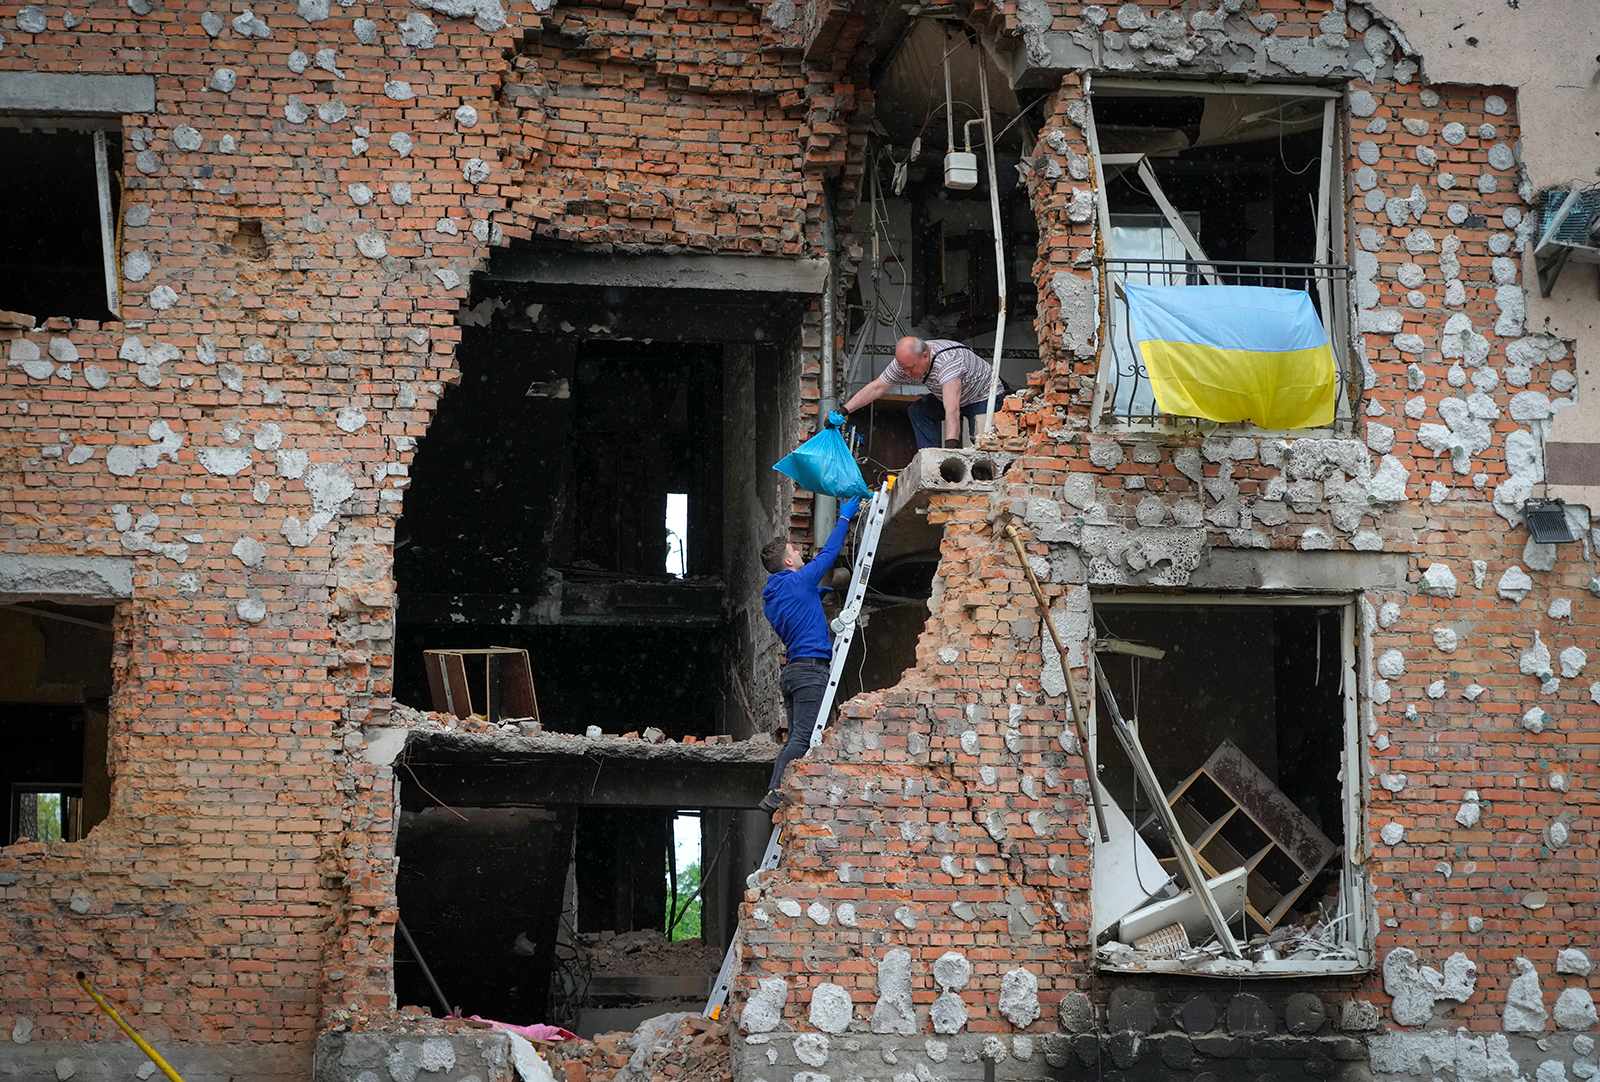 Residents take out their belongings from their house ruined by the Russian shelling in Irpin, Ukraine, on Saturday, May 21.